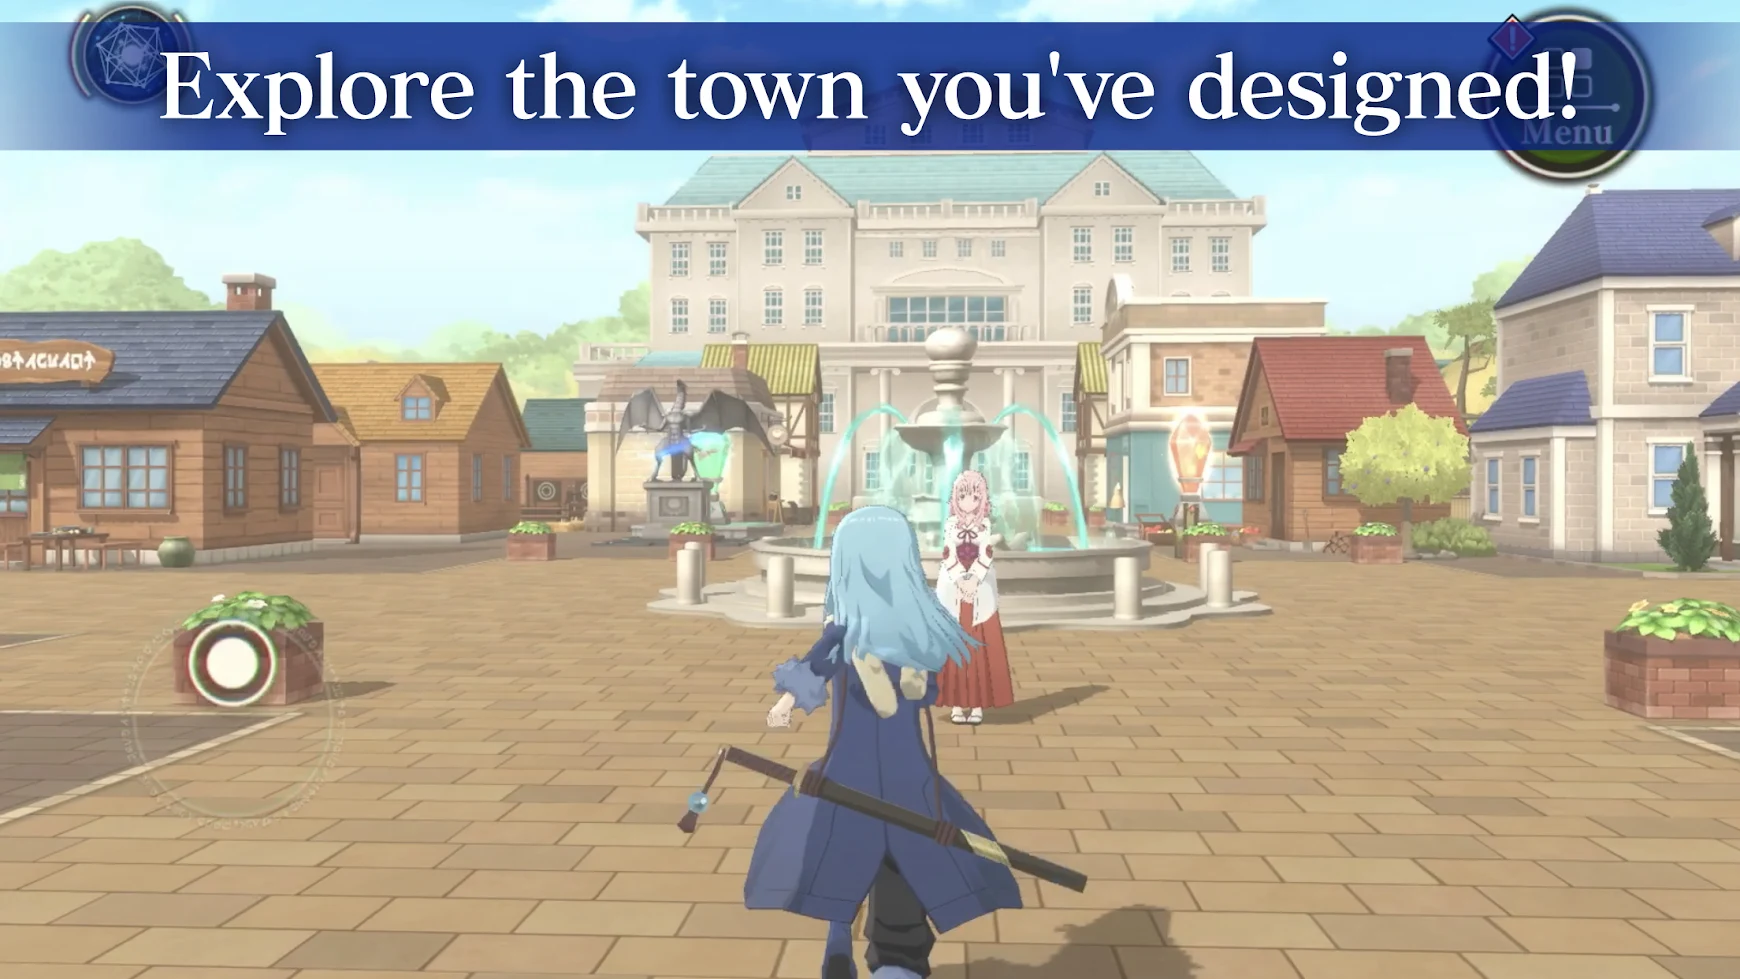 That time I got reincarnated as a slime  - town exploration